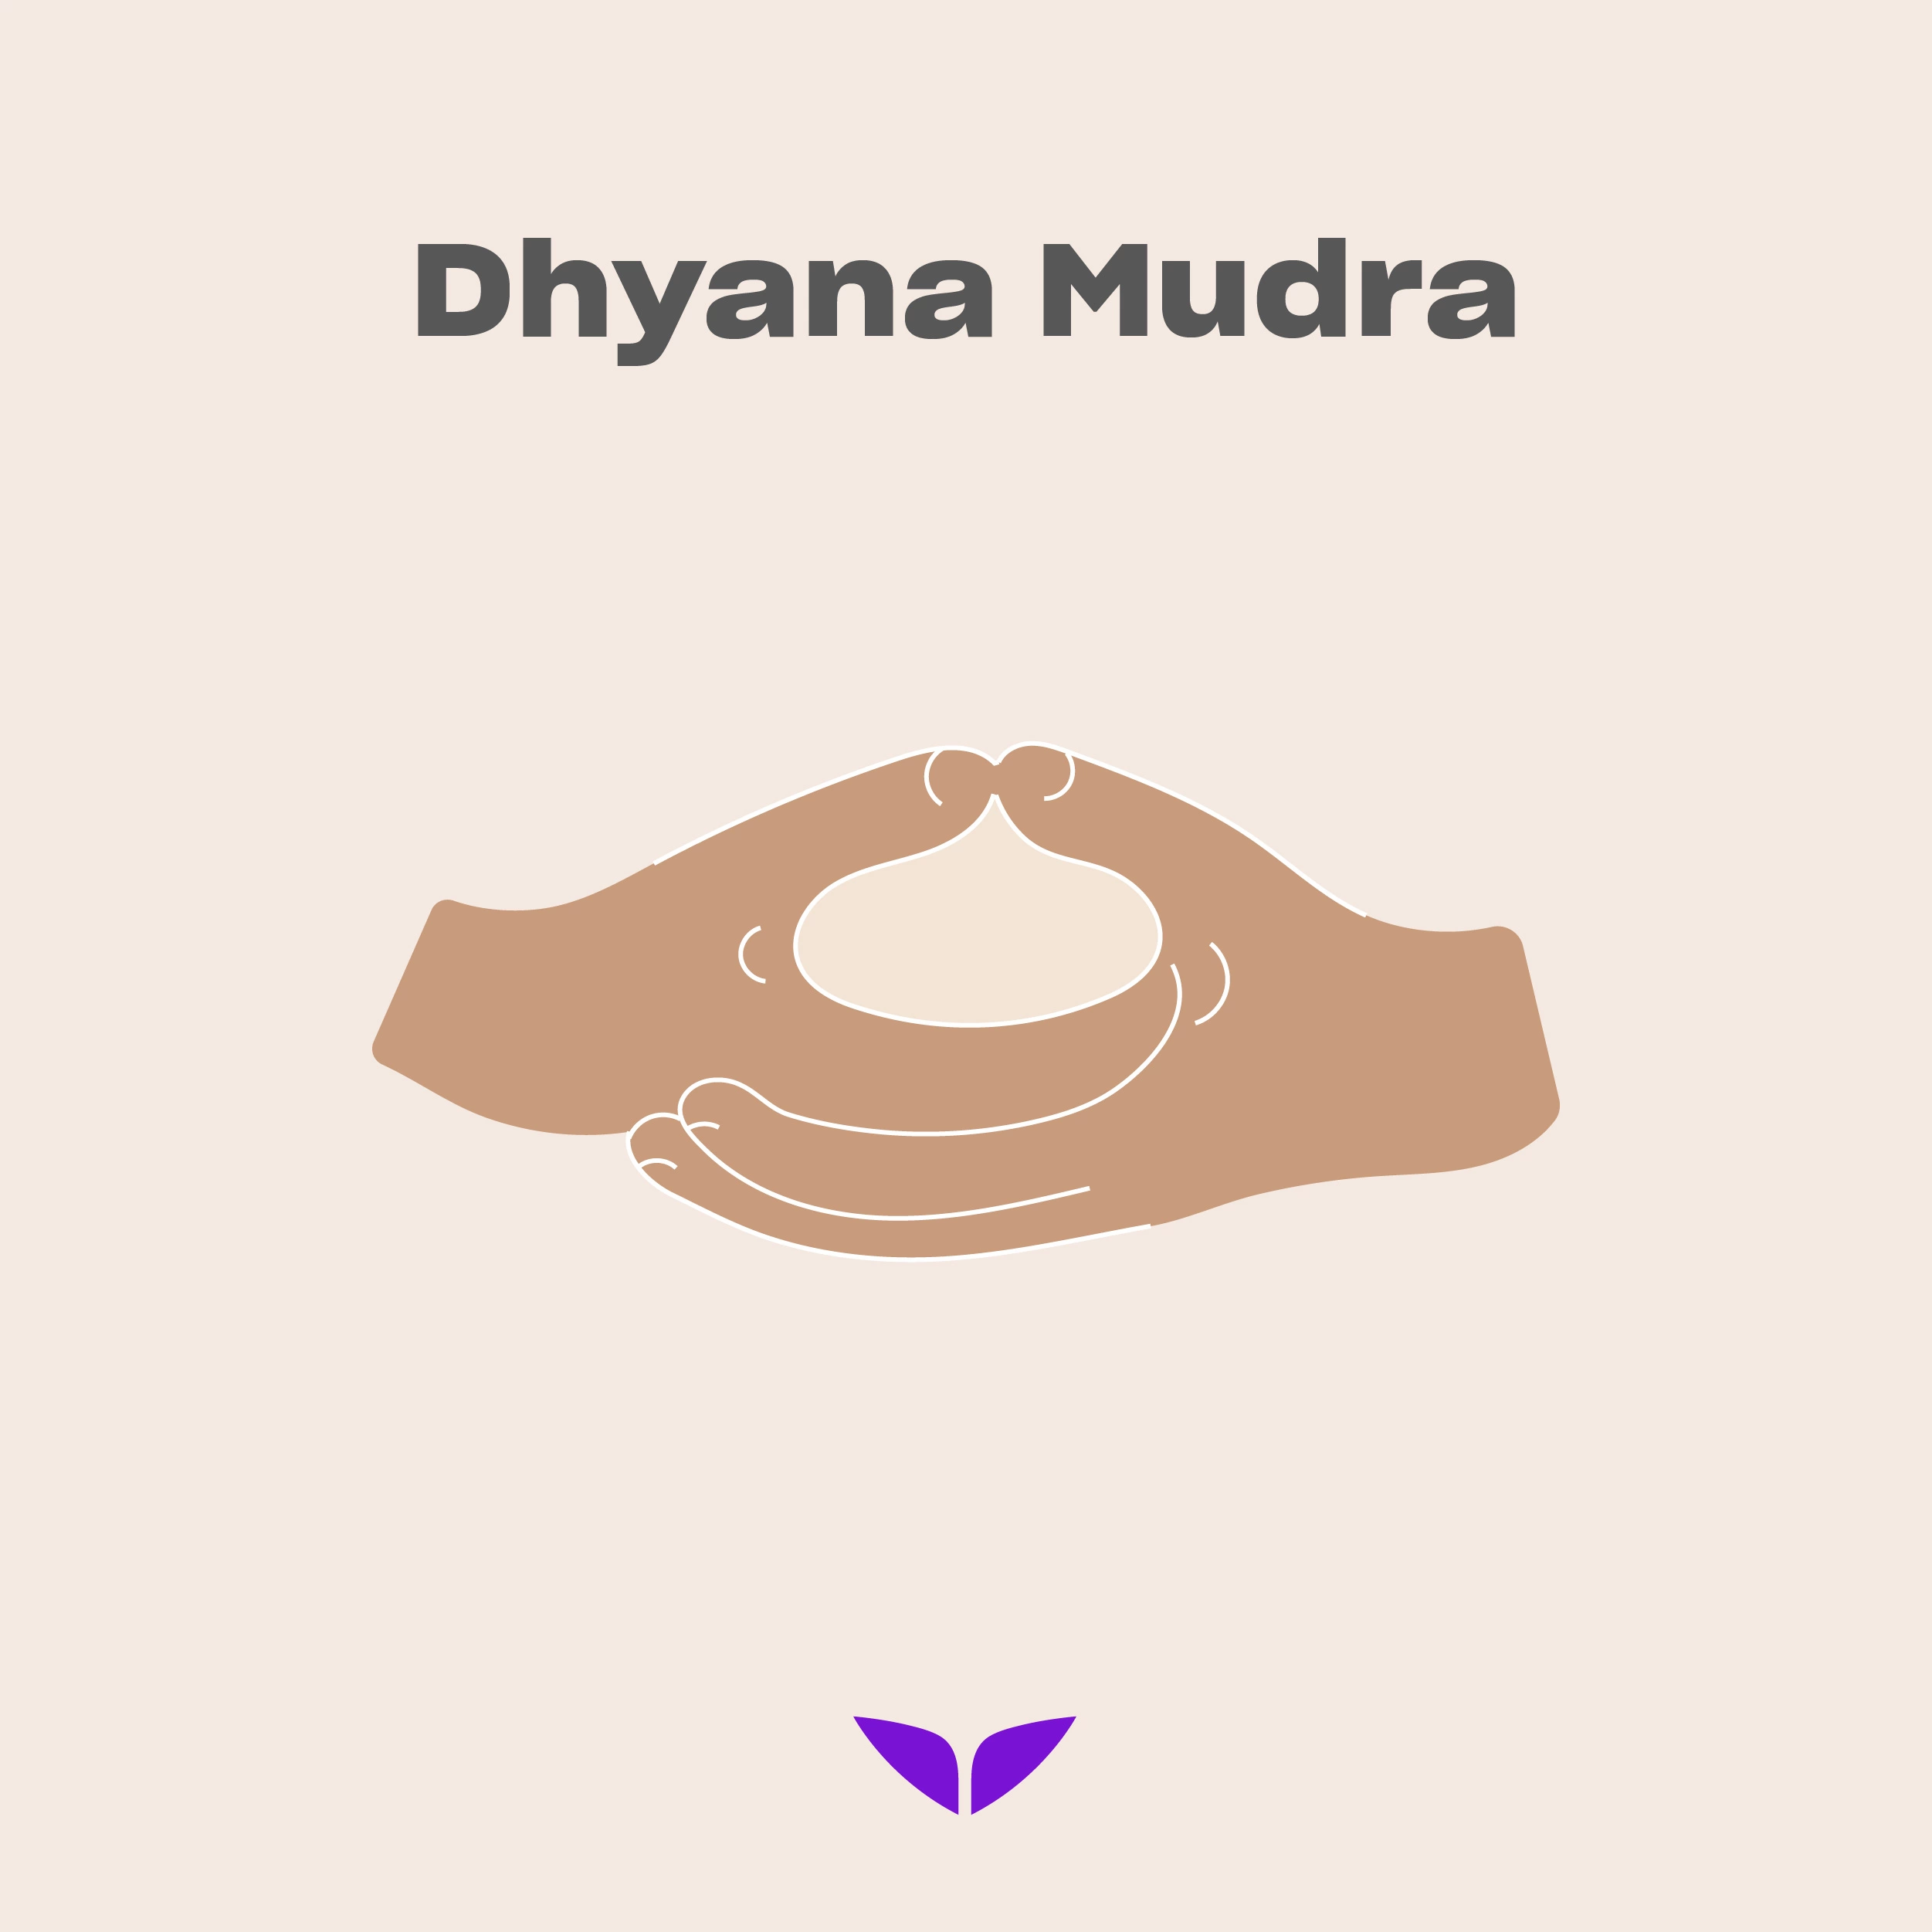 The Dhyana mudra: the seal of meditation